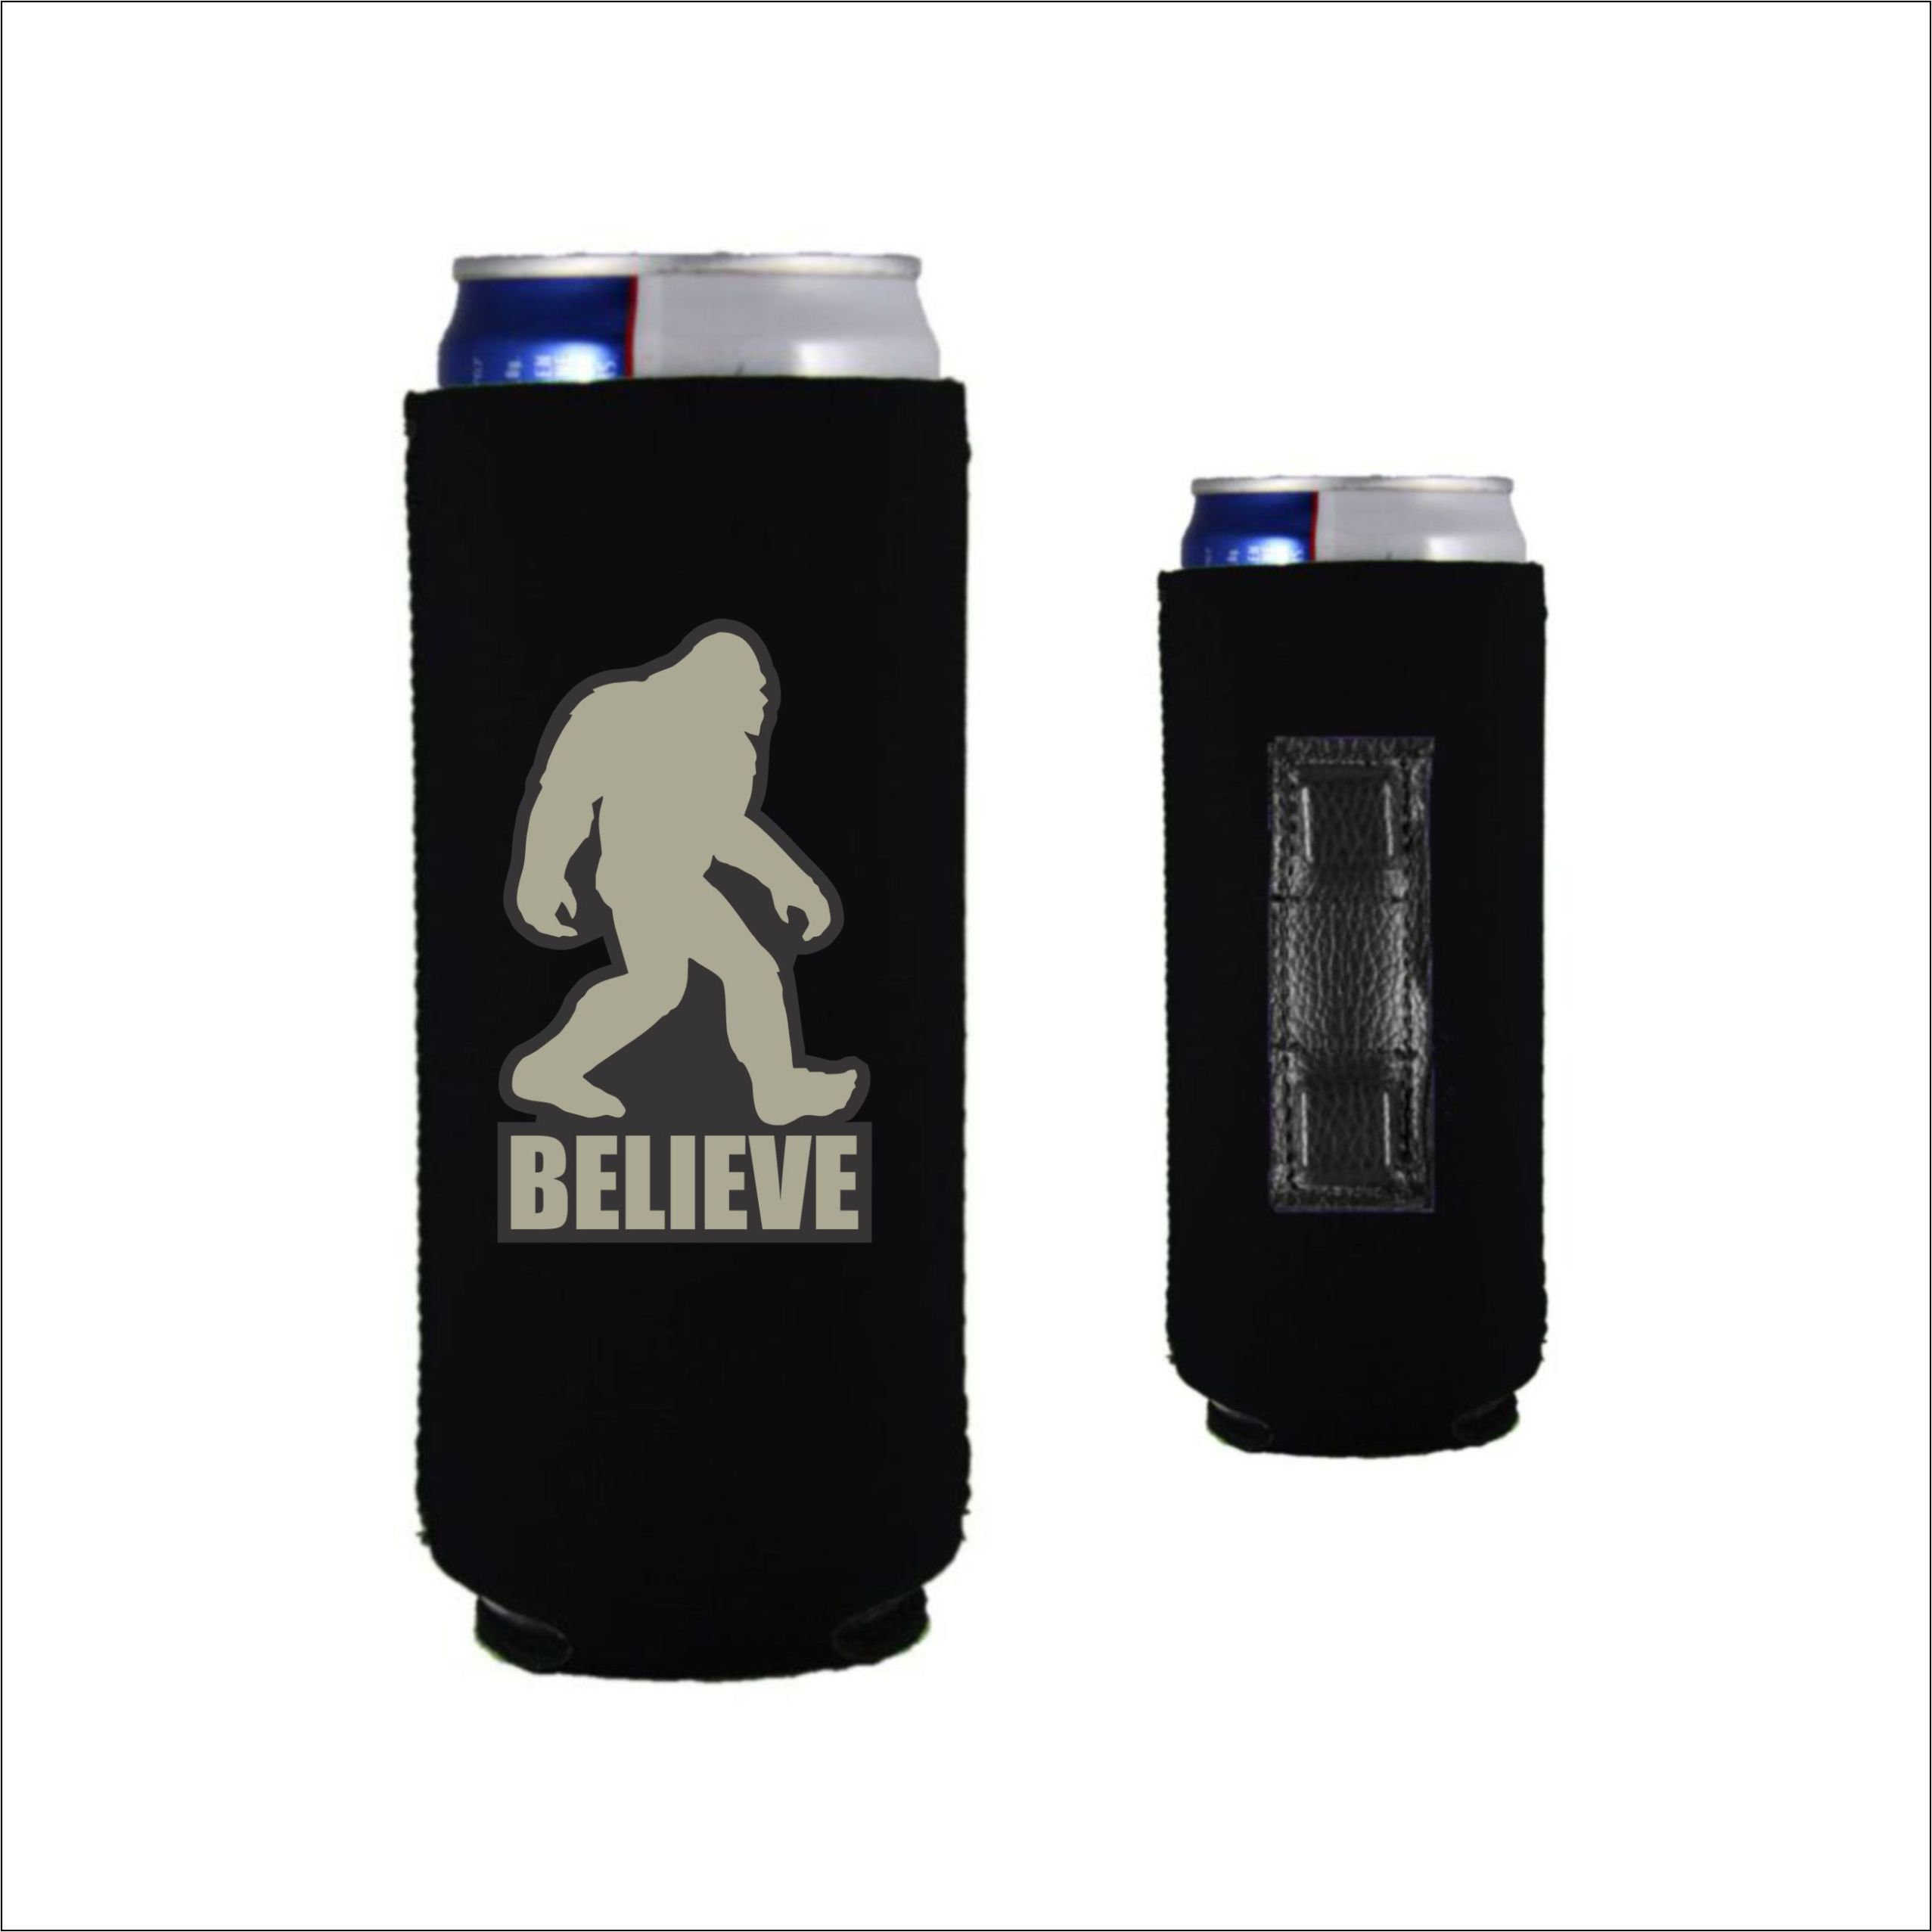 YETI TO PARTY WHITE CLAW Funny Koozie Bigfoot Sasquatch Slim Can Cooler